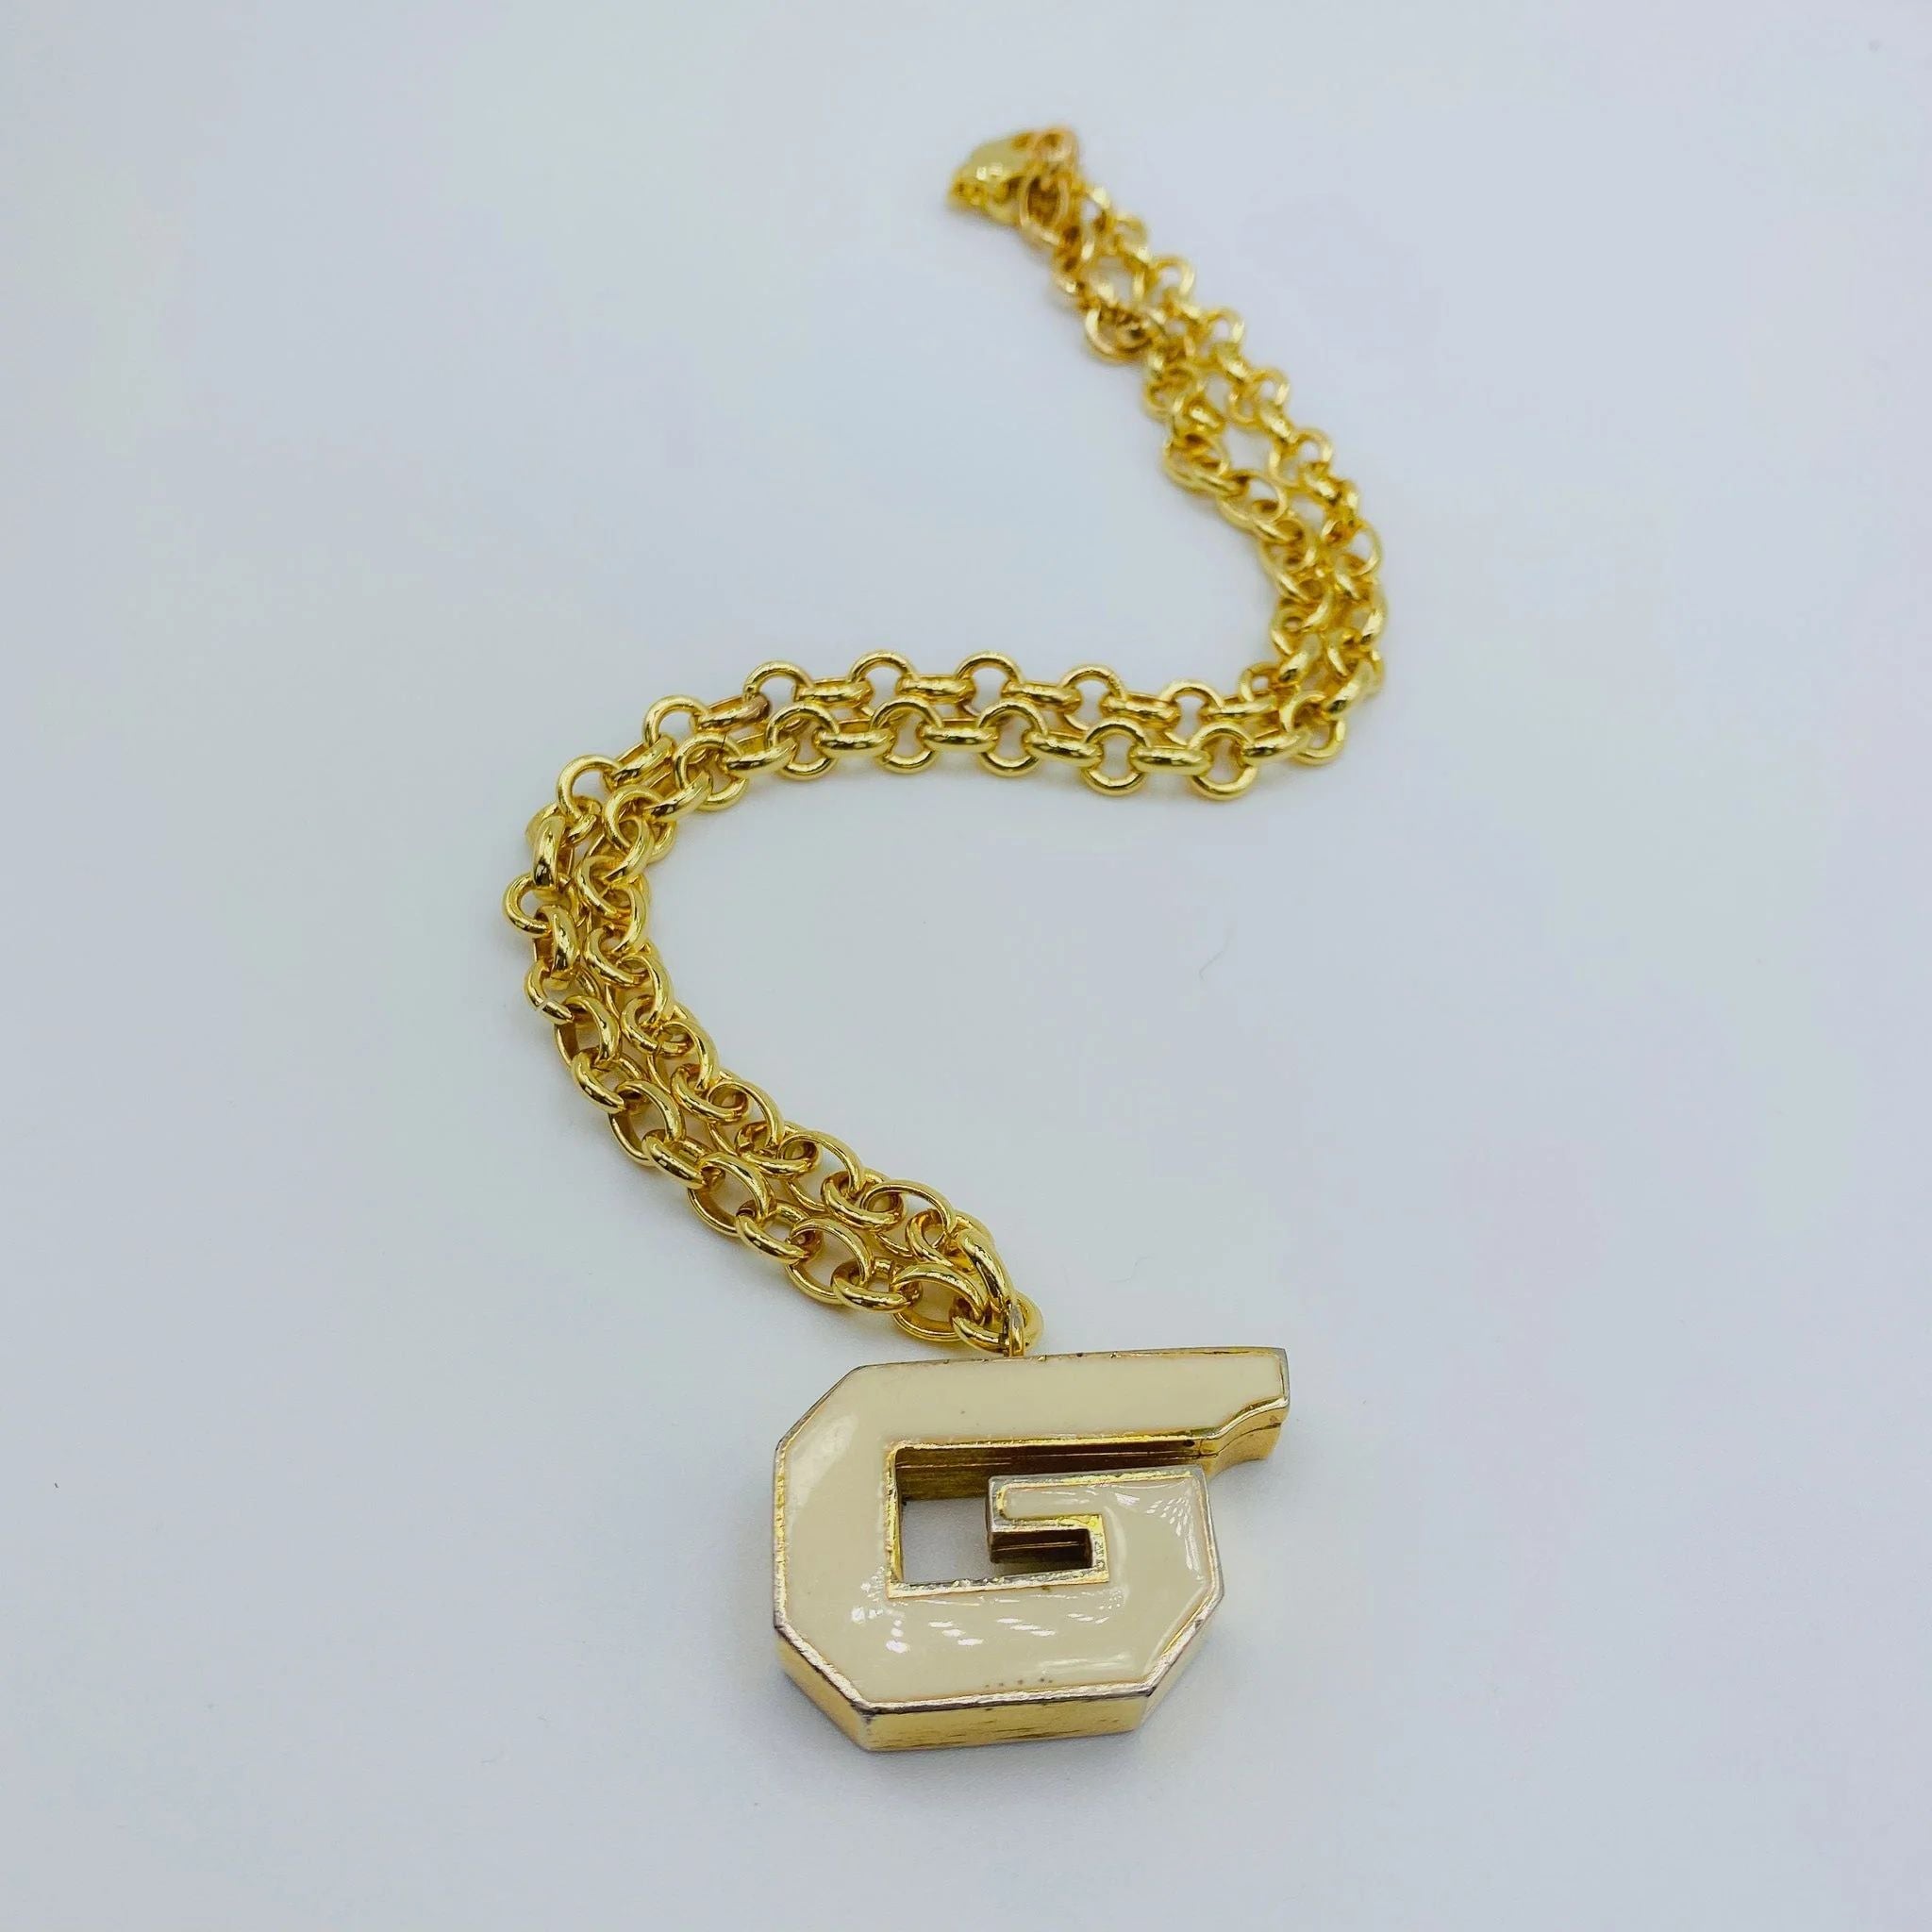 Re-engineered Vintage Givenchy Whistle Keychain 1970s - 1979 Collection